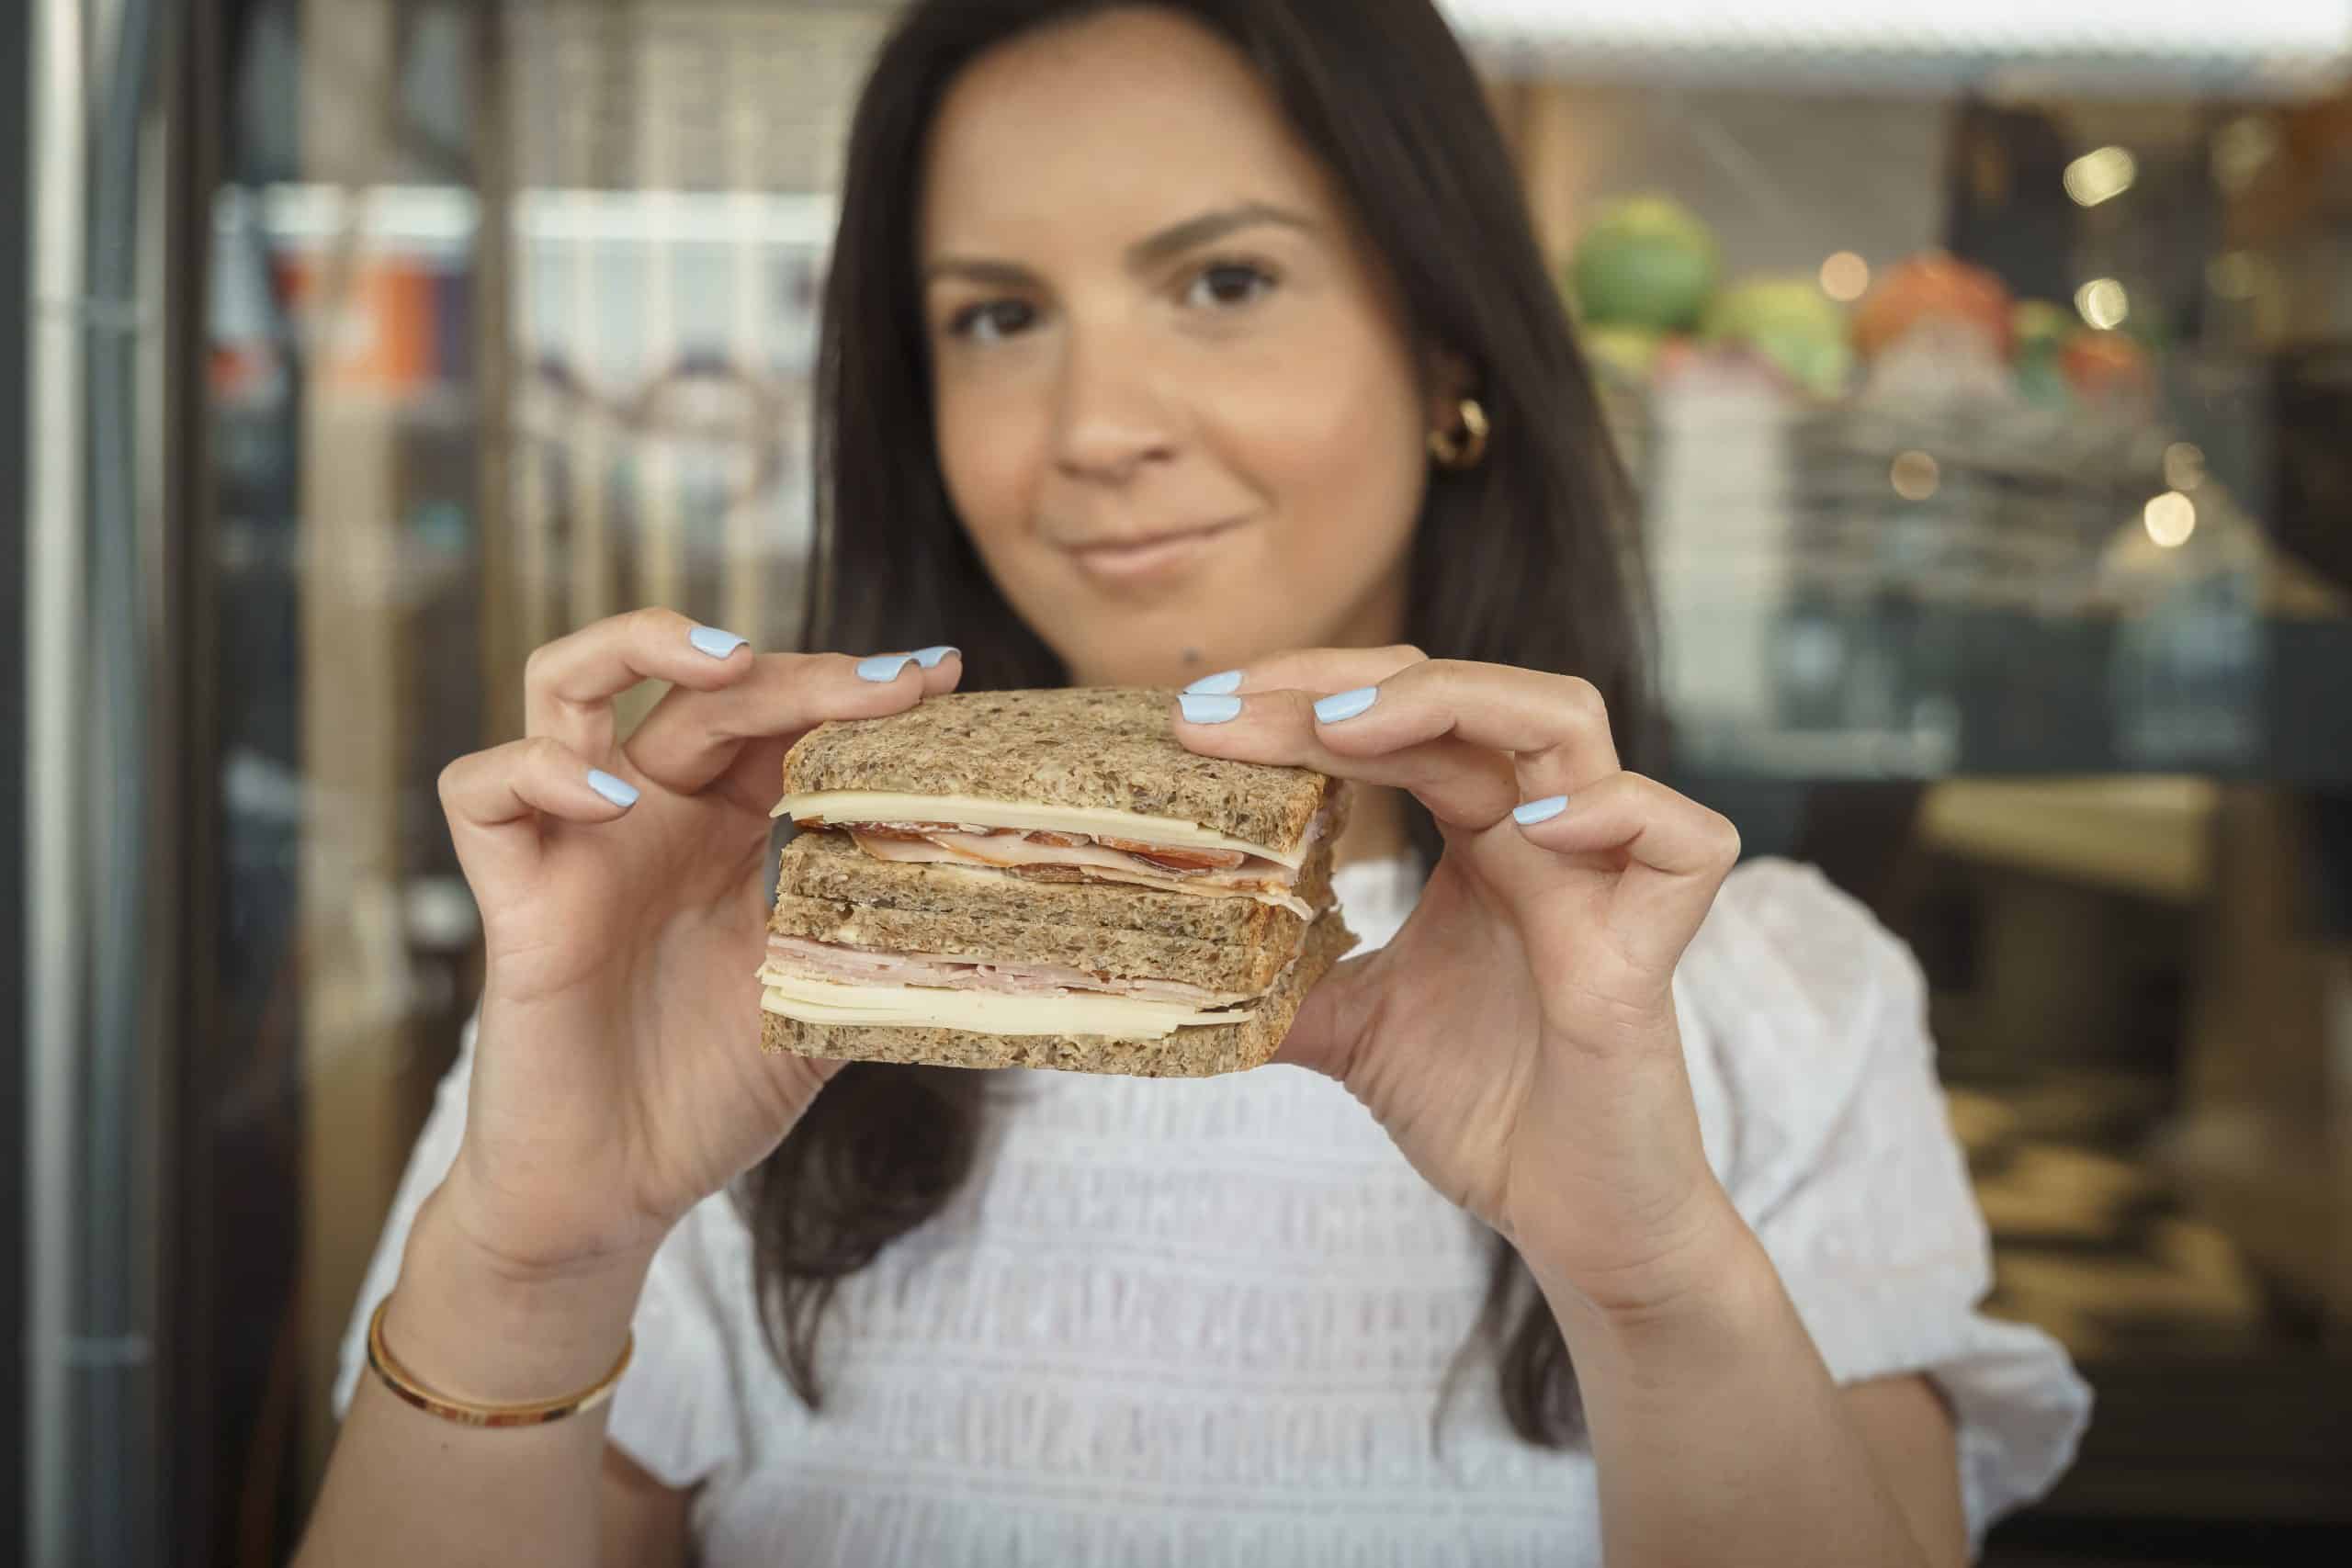 $29 ham and cheese sandwich a total rip-off — so why are NYers eating it up?